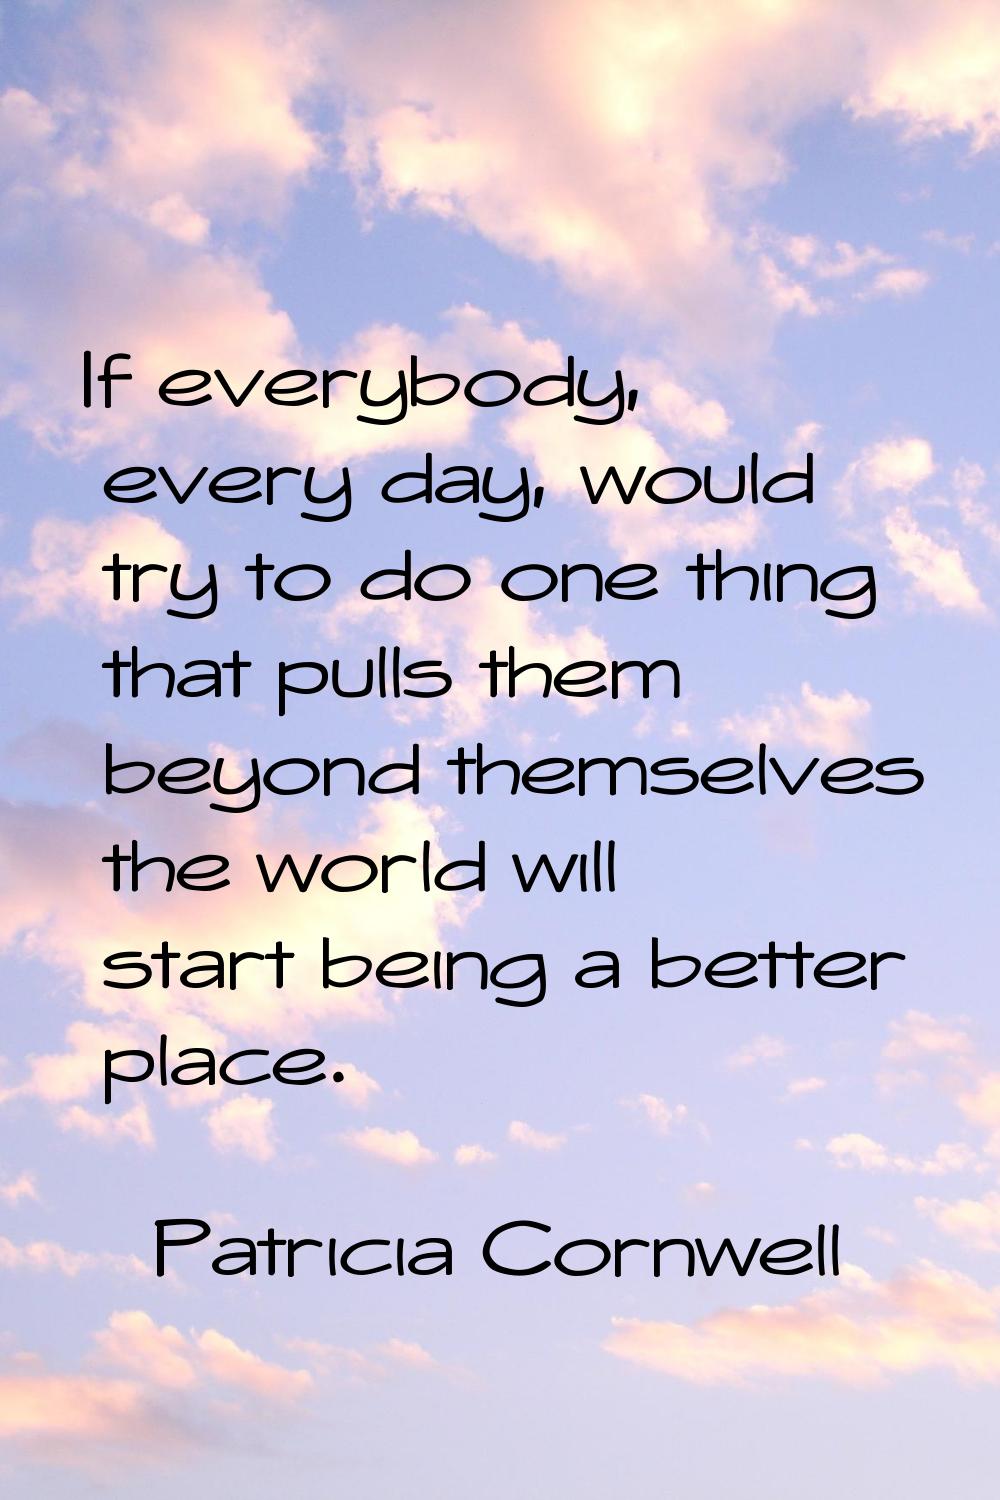 If everybody, every day, would try to do one thing that pulls them beyond themselves the world will